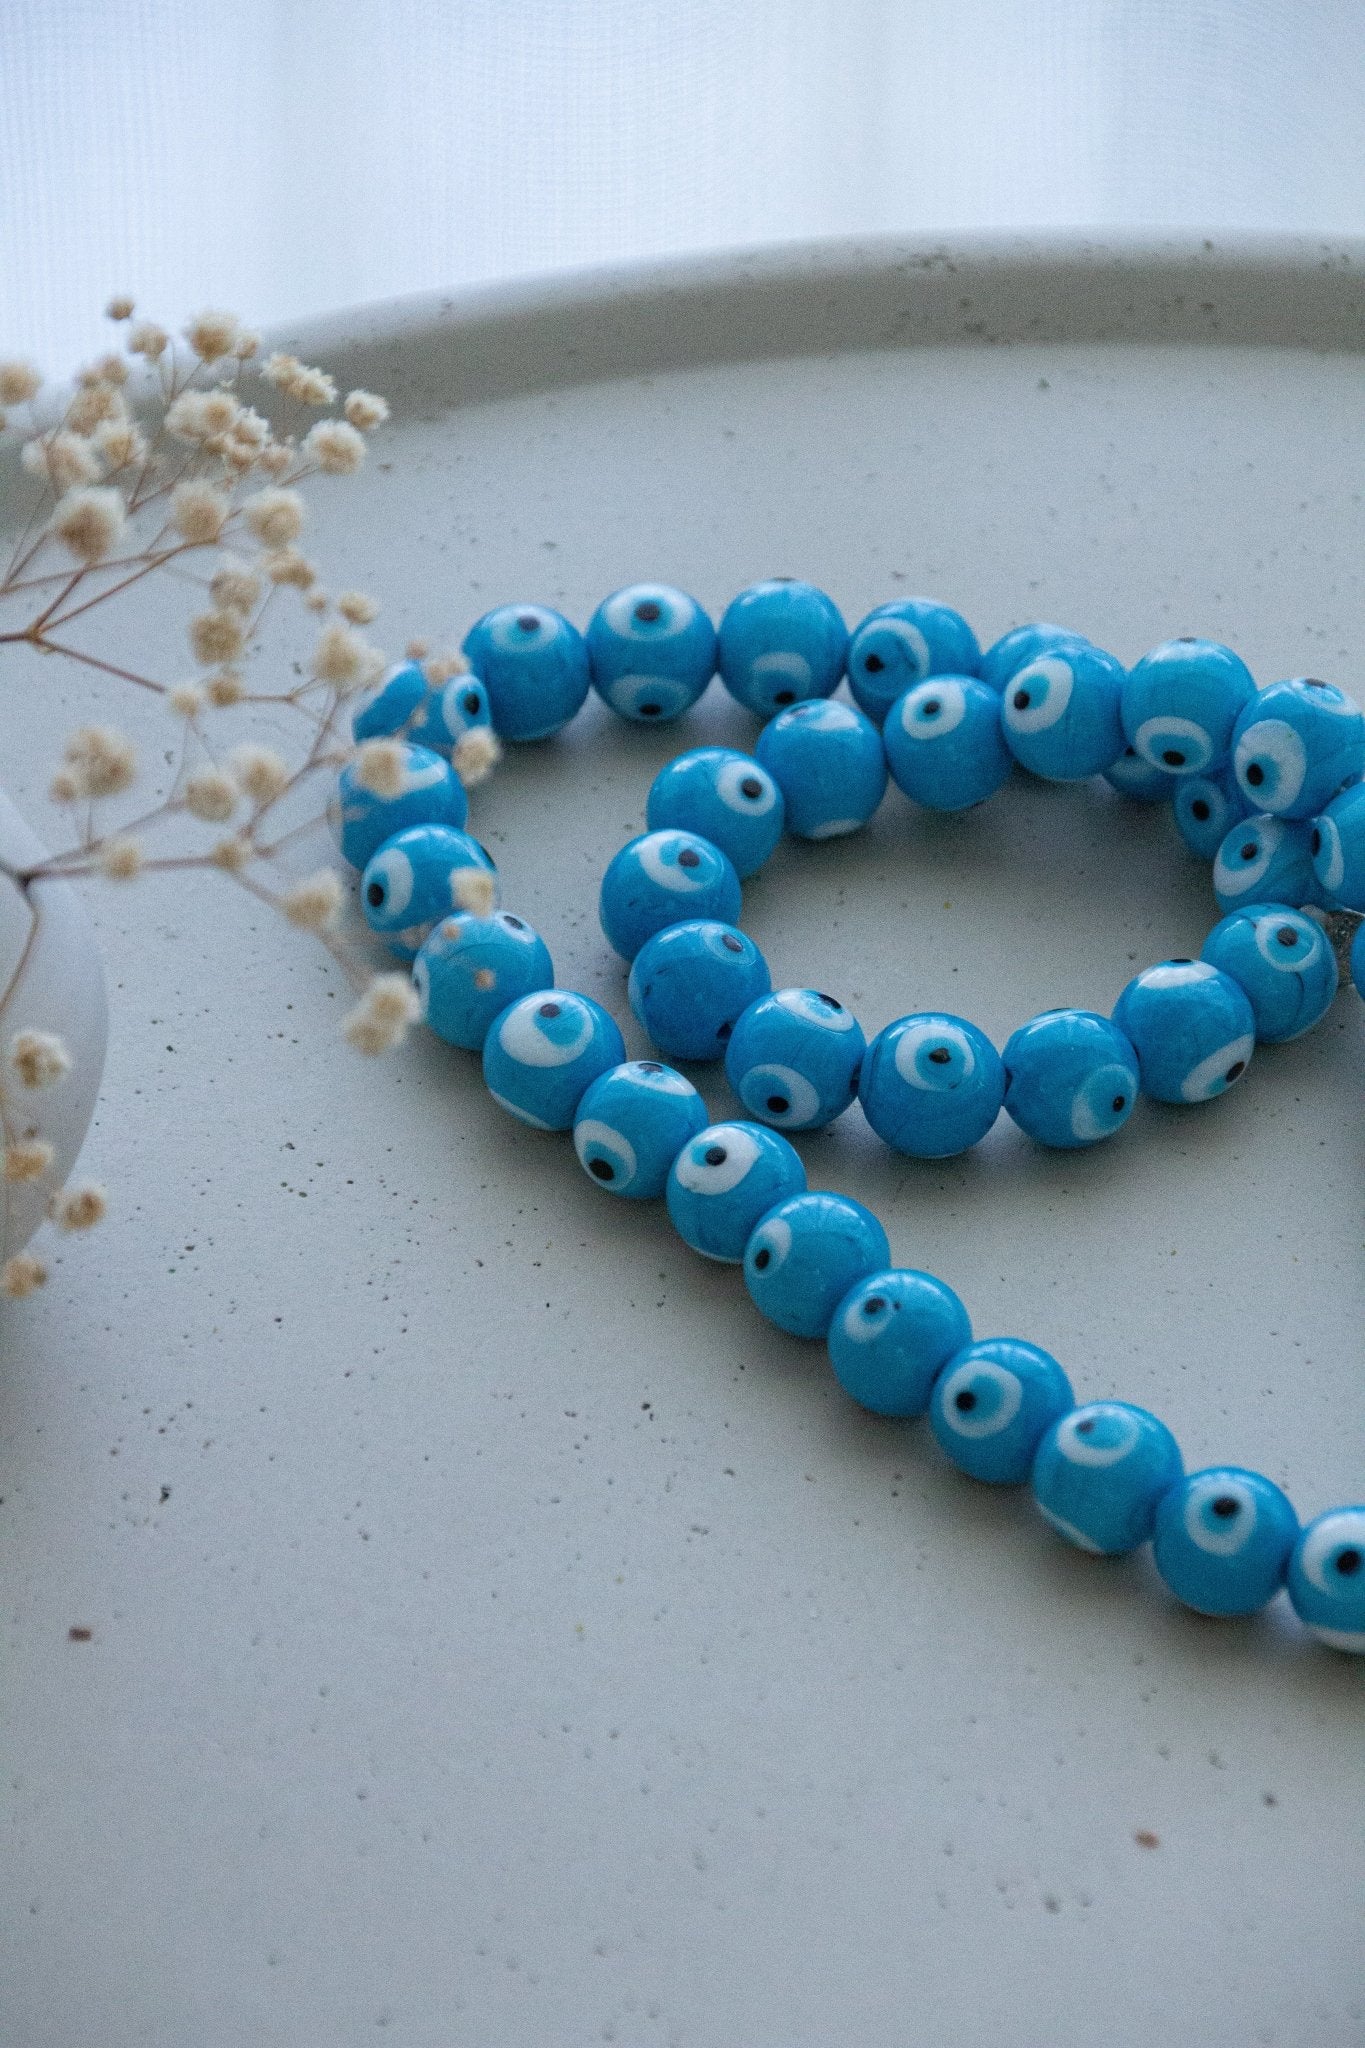 Evil eye glass beads home decor necklace with white silk tassel - Turquoise - Stylish Luck Home Decor | Hamsa \ Hand Of Fatima | Good Luck Gifts